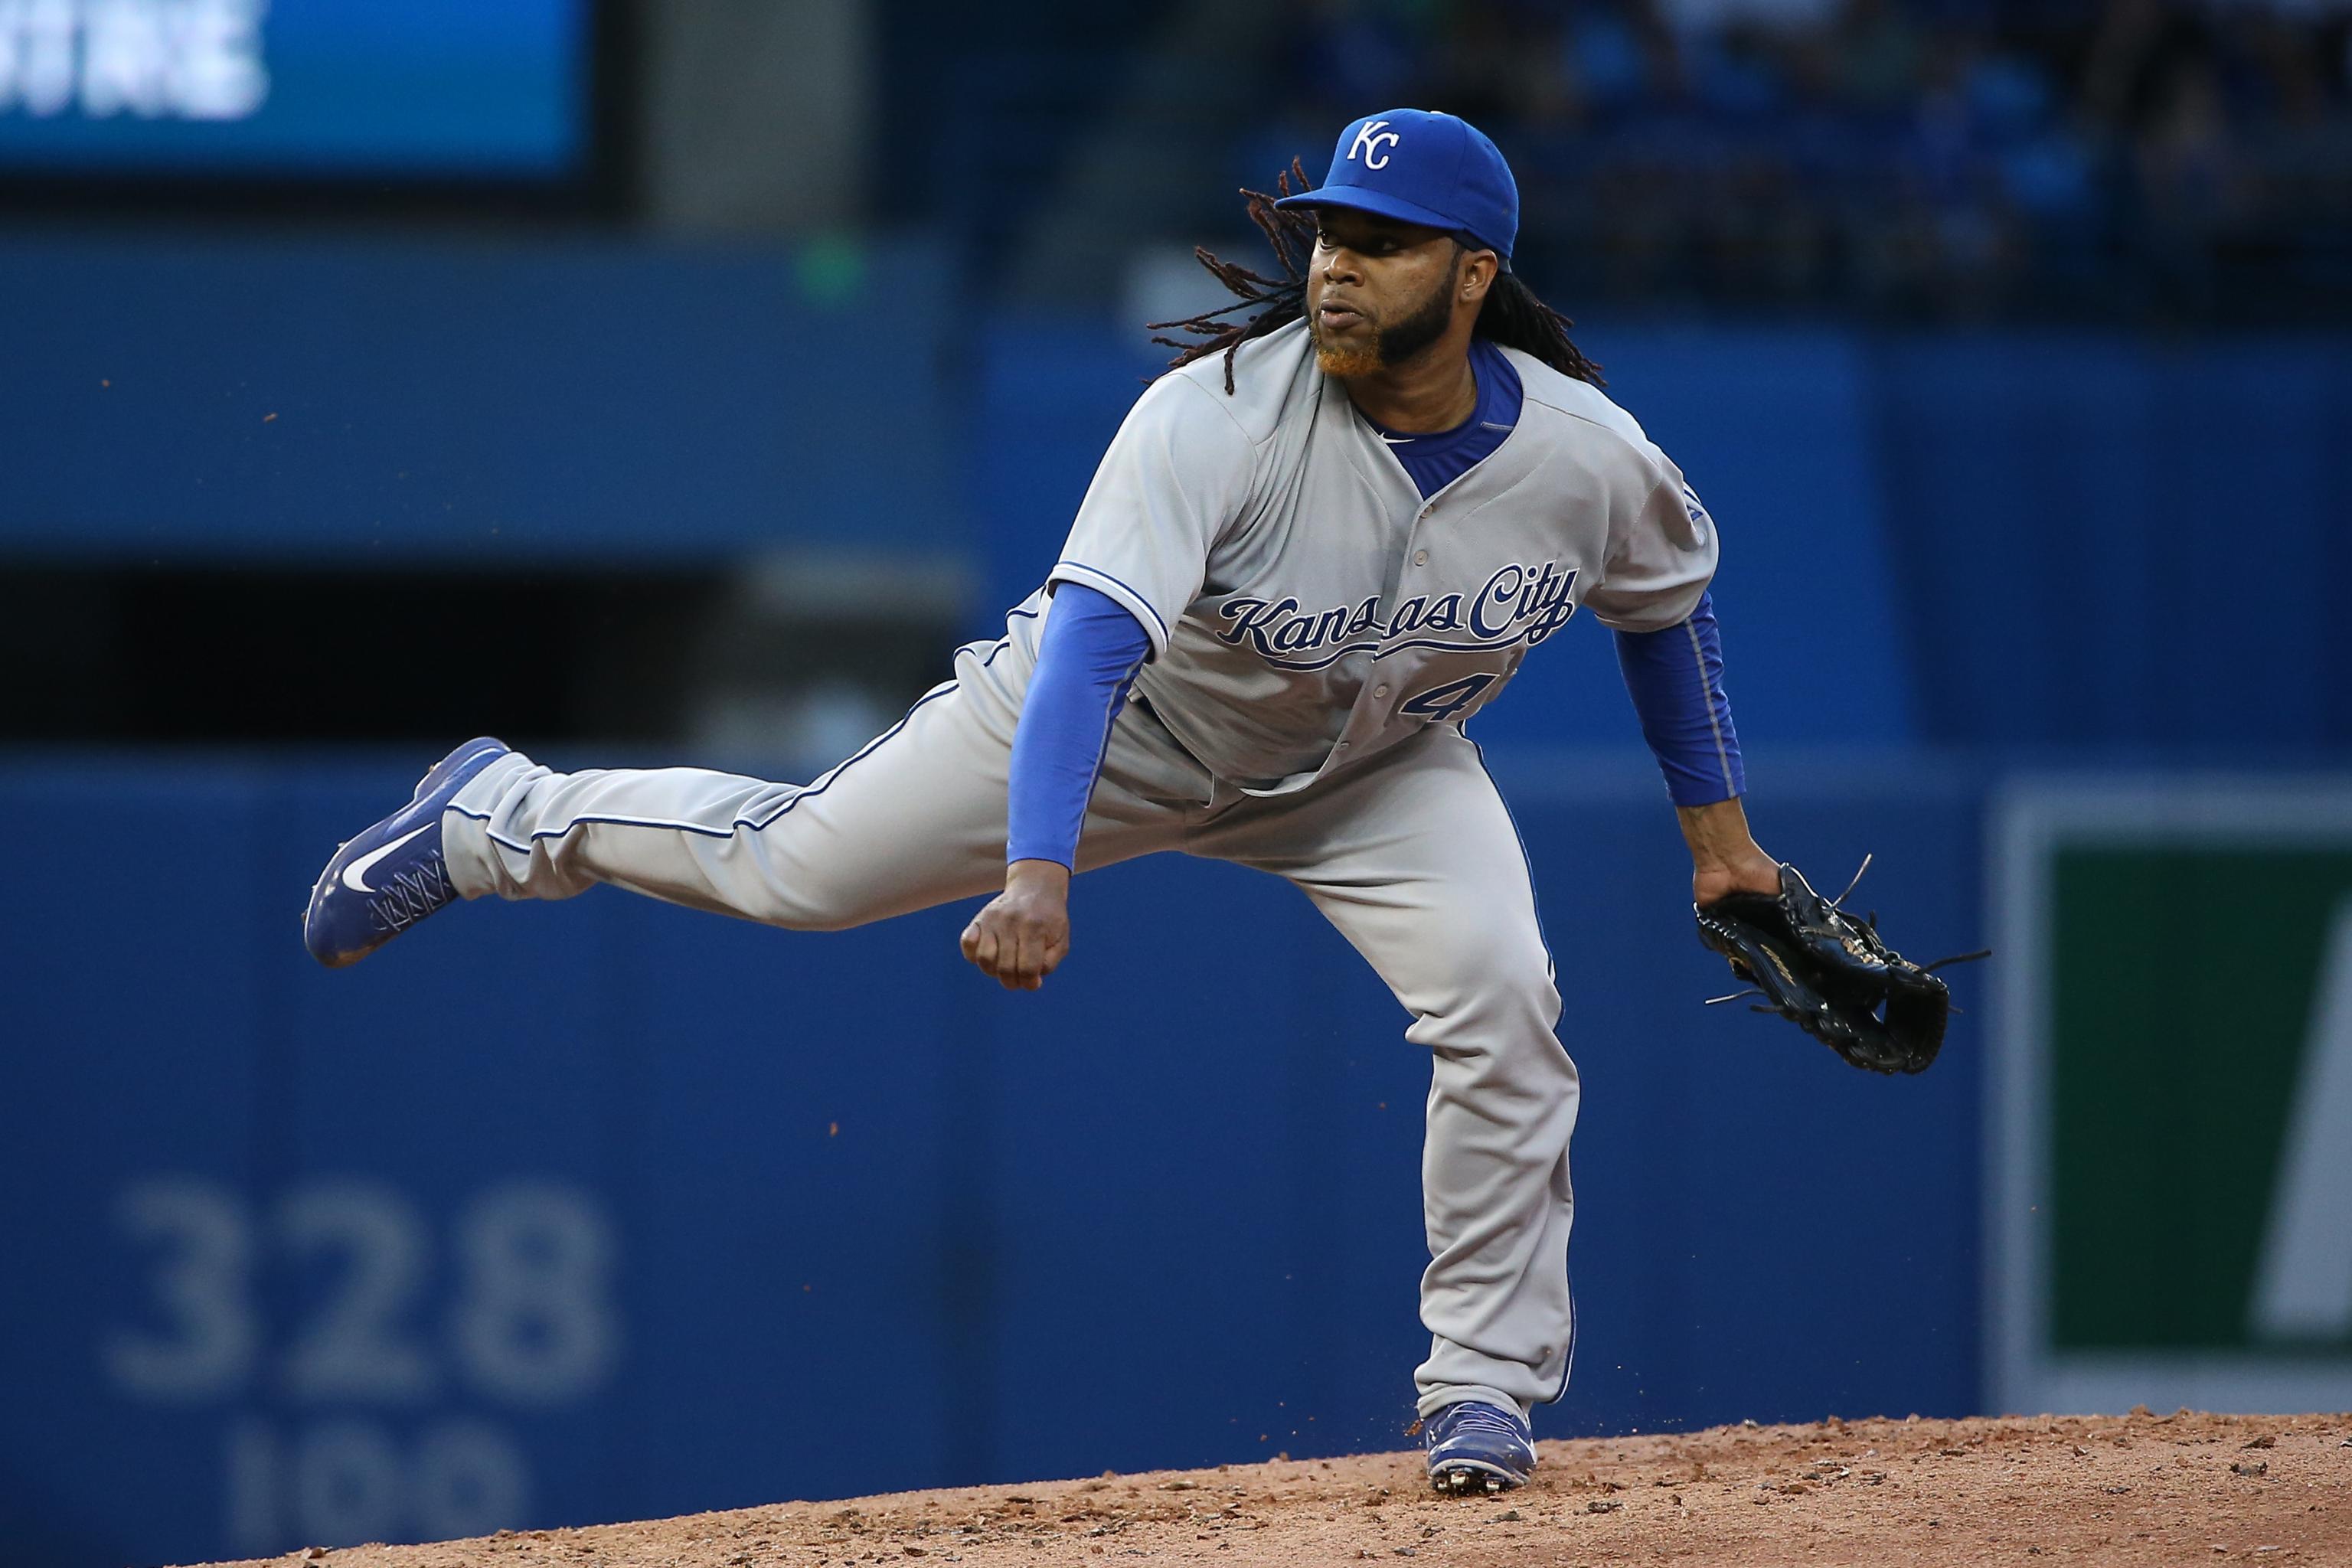 Johnny Cueto: Reds trade ace to Royals for three pitchers - Sports